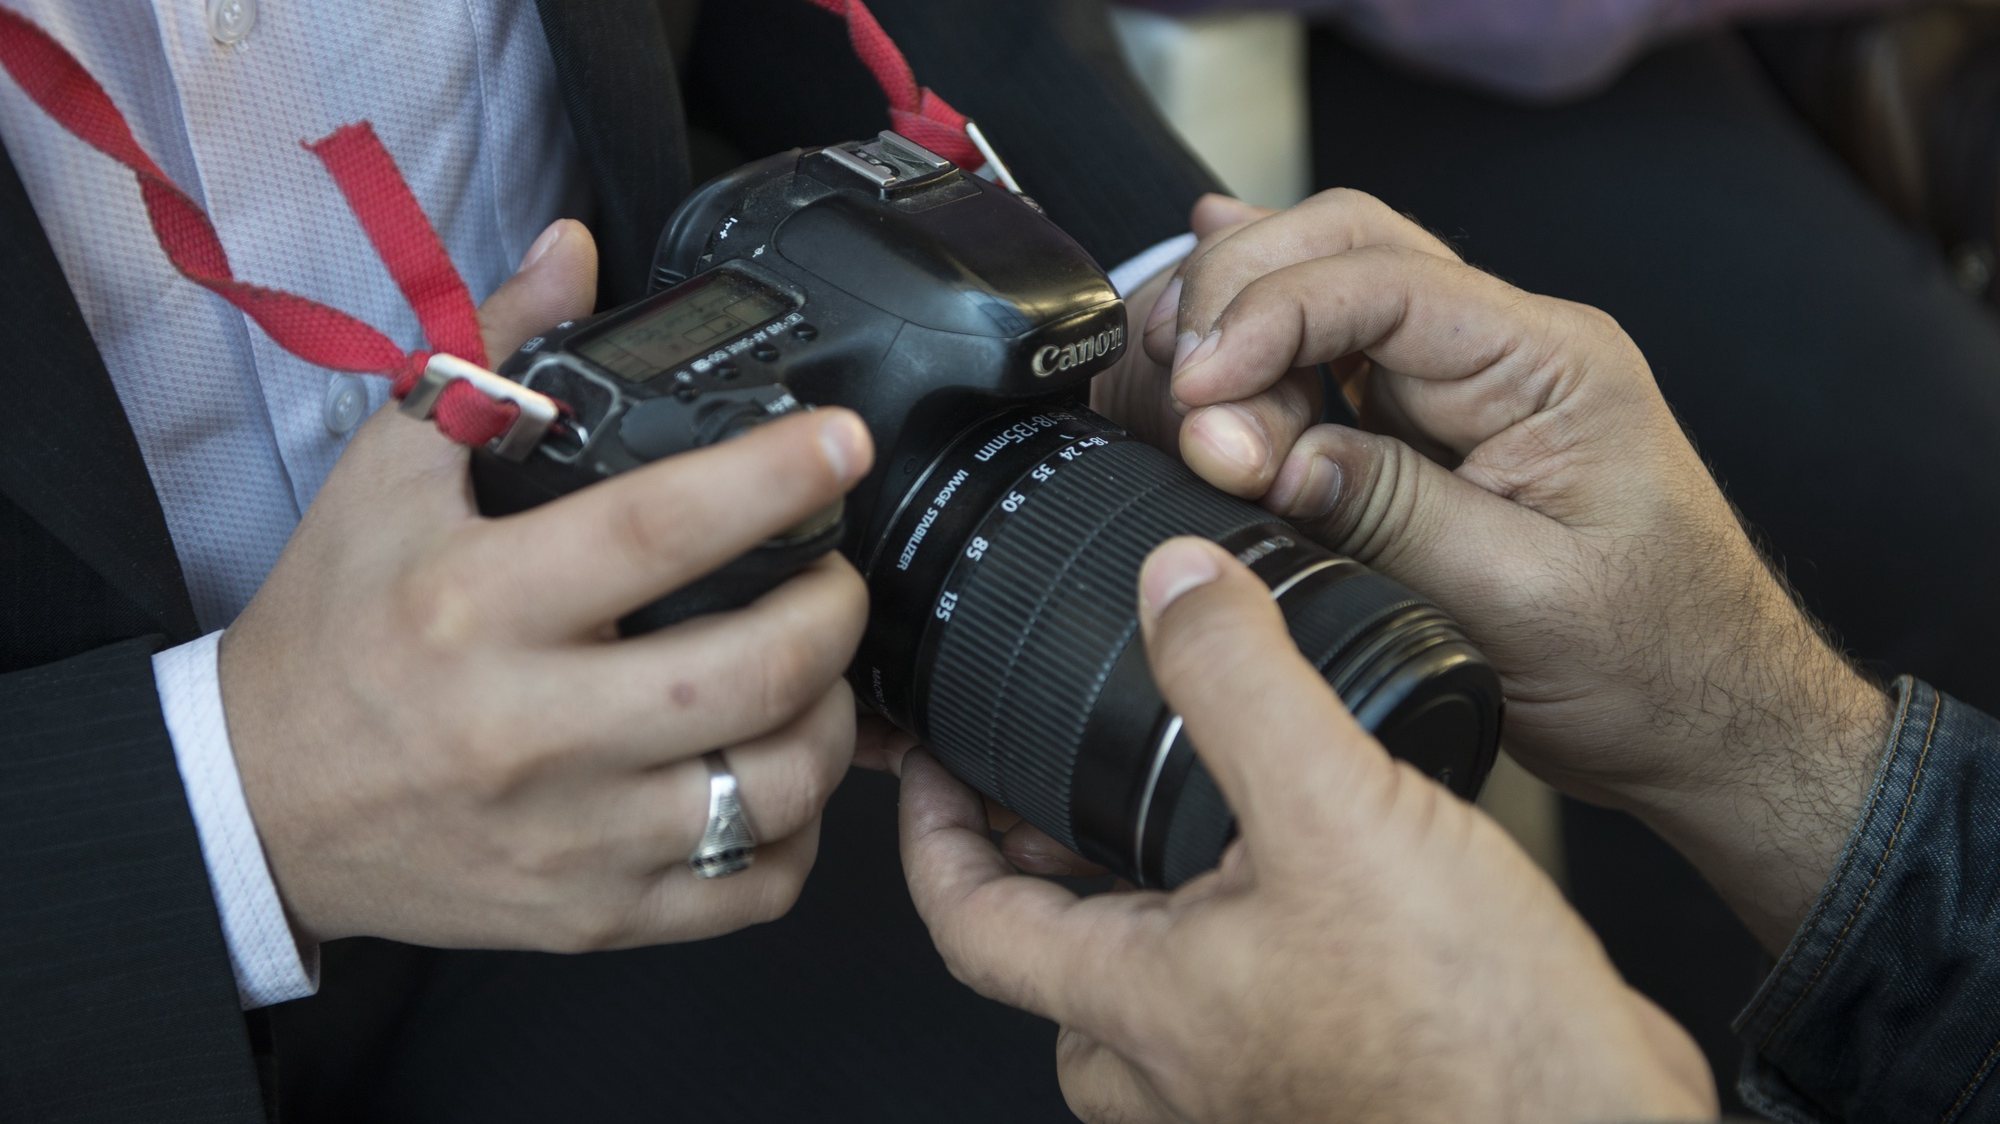 epa08090881 A blind man explores the camera during photography course in Cairo, Egypt, 18 December 2019 (issued 26 December 2019). Egyptian photographer Khaled Fareed began an initiative to assist blind and visually impaired people in learning photography. According to Fareed, the aim of the initiative is to help blind people to take photos independently without using mobile phone apps or other equipment designed for visually impaired people, which could help them fulfill their ambition in becoming professional photographers.  EPA/MOHAMED HOSSAM  ATTENTION: This Image is part of a PHOTO SET